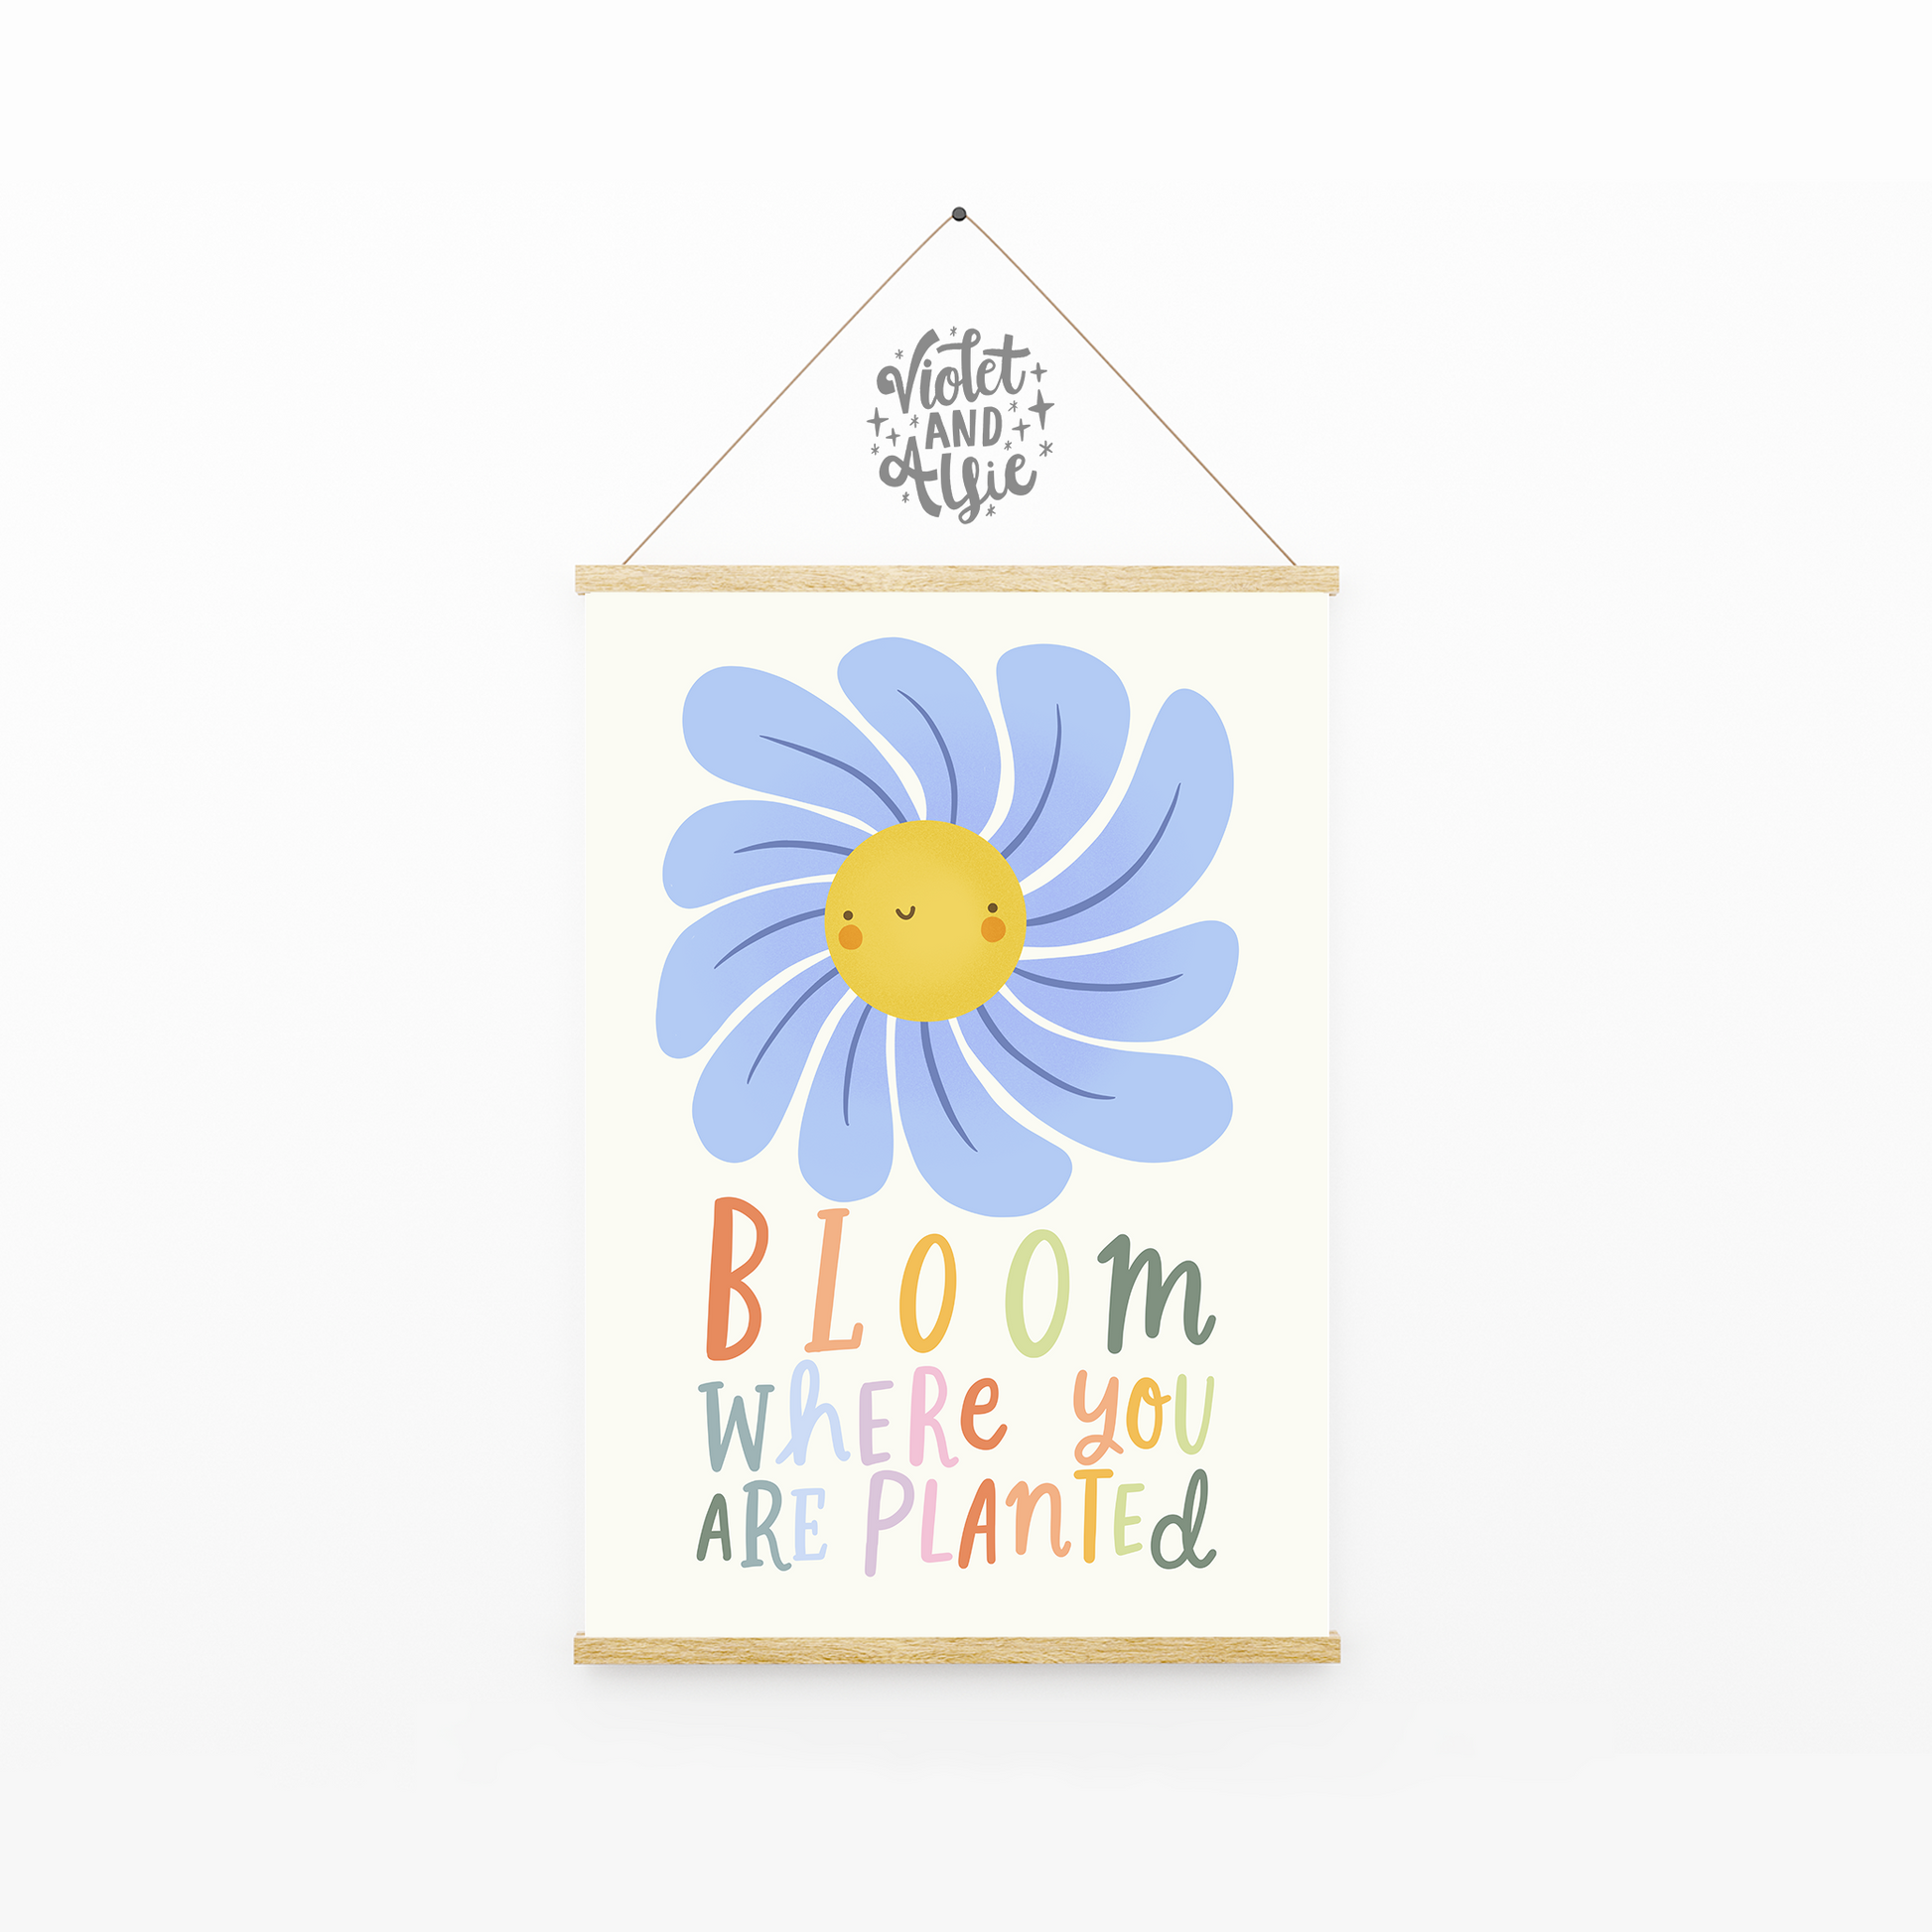 bright  cheerful floral print, smiley flower, hand lettered, Bloom where you are planted, vibrant gallery wall display, Retro flower art, motivational quote, empowering mantra, positivity quote print, A5 A4 A3 size, prints for gallery wall, colourful home aesthetic